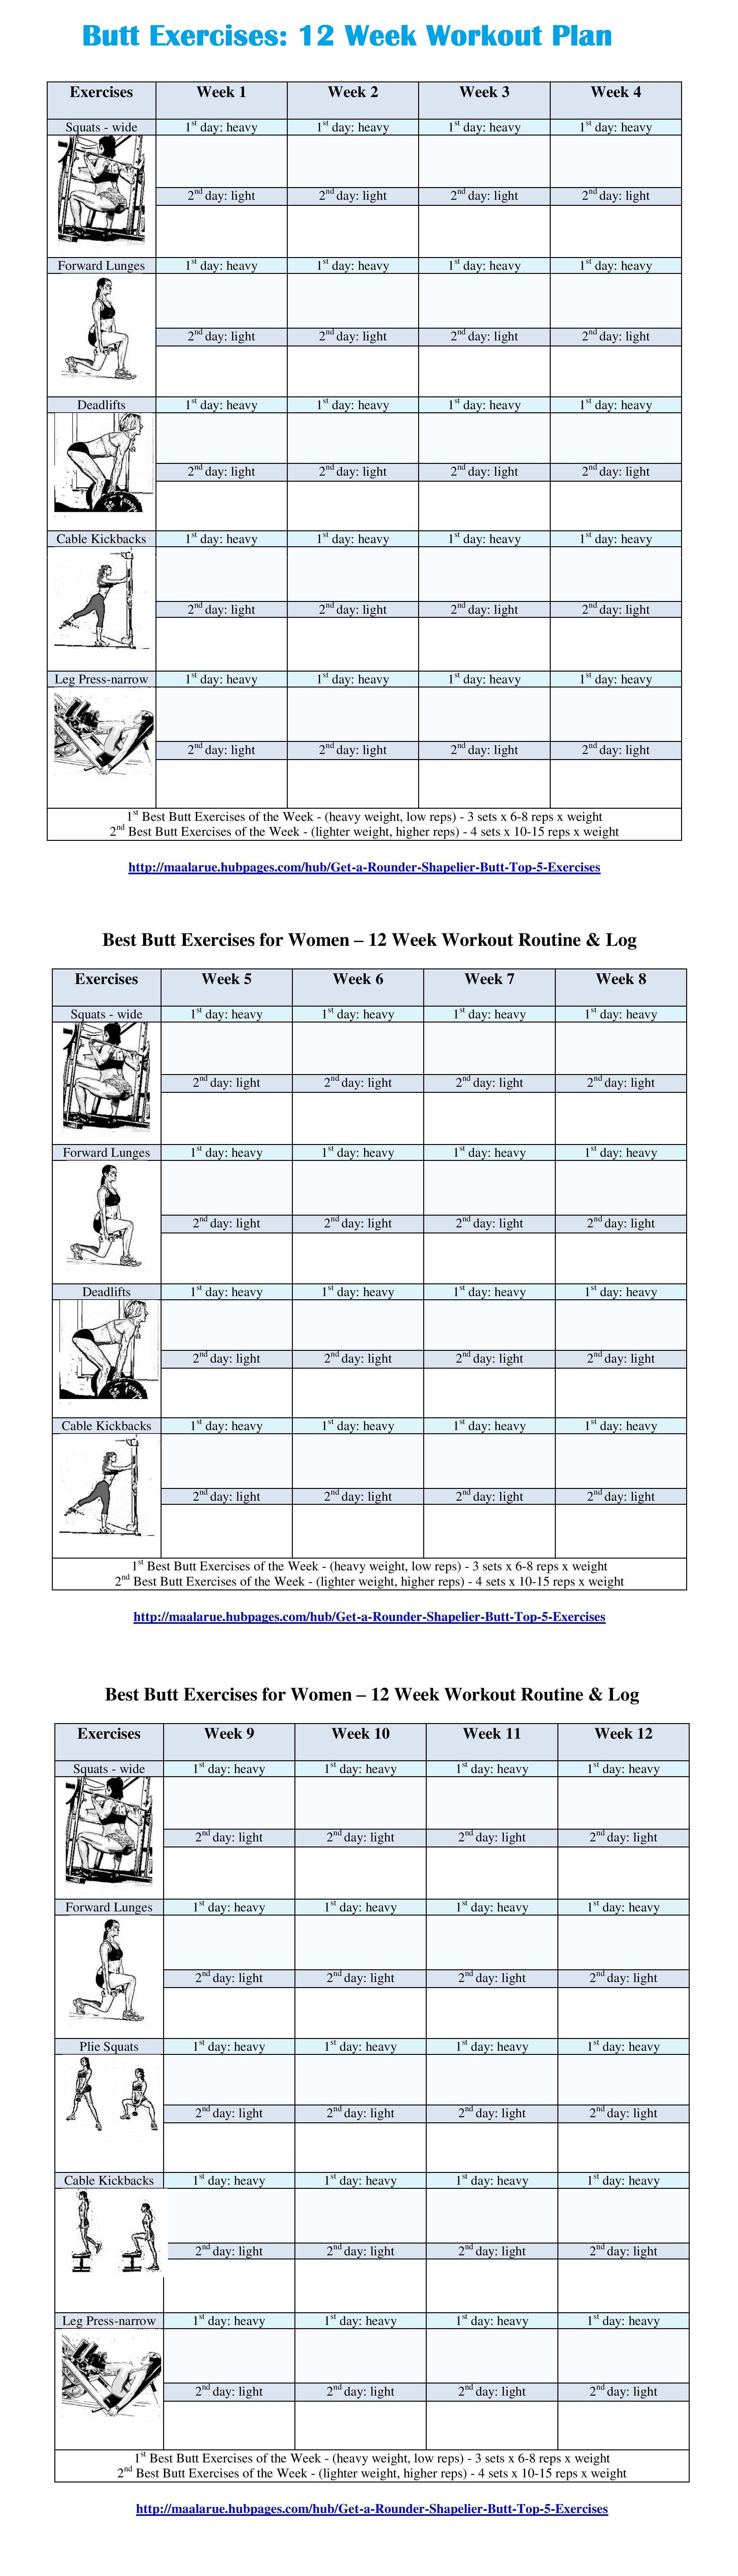 Best Butt Workouts For Women - Free Printable 12 Week Butt Workout Plan - Free Printable Gym Workout Plans